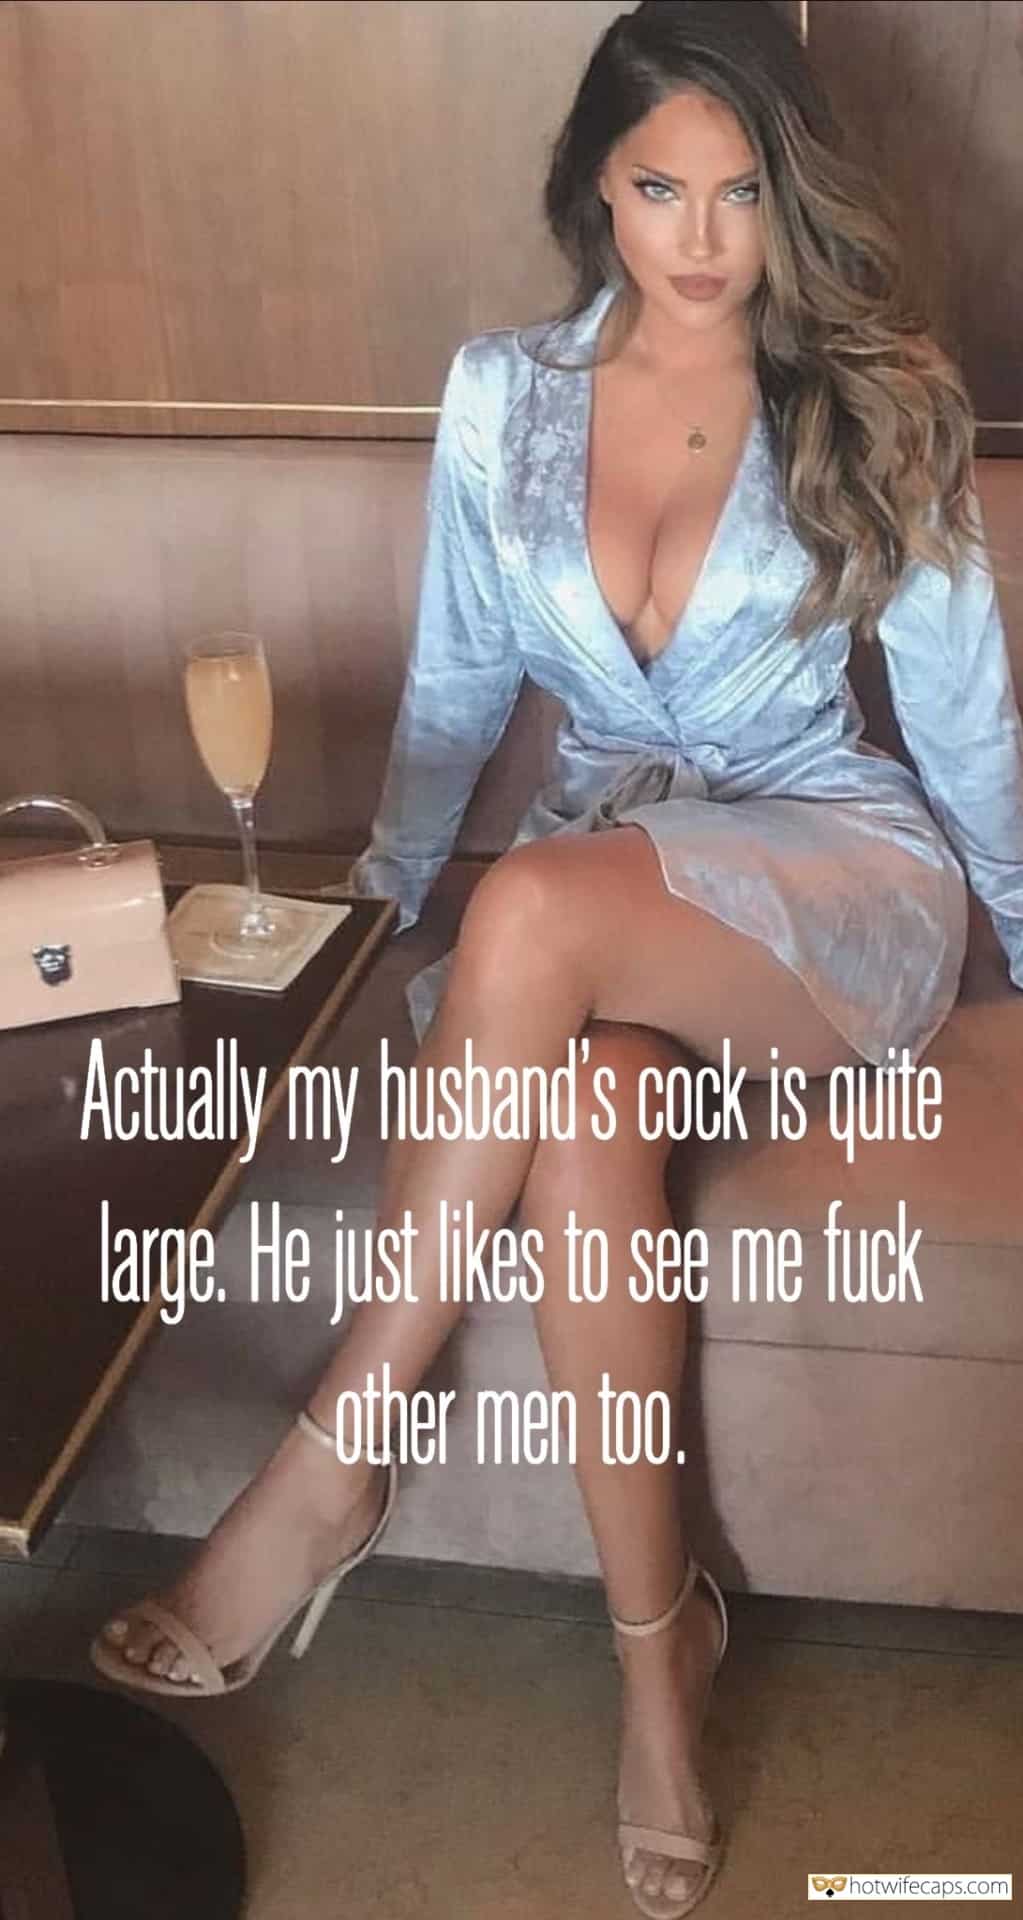 Sexy Memes Dirty Talk hotwife caption: Actually my husband’s cock is quite large. He just likes to see me fuck other men too. hotwife vixen caption my wife like other man porn Blue Eyed Vixen Wife Looking Hot as Hell